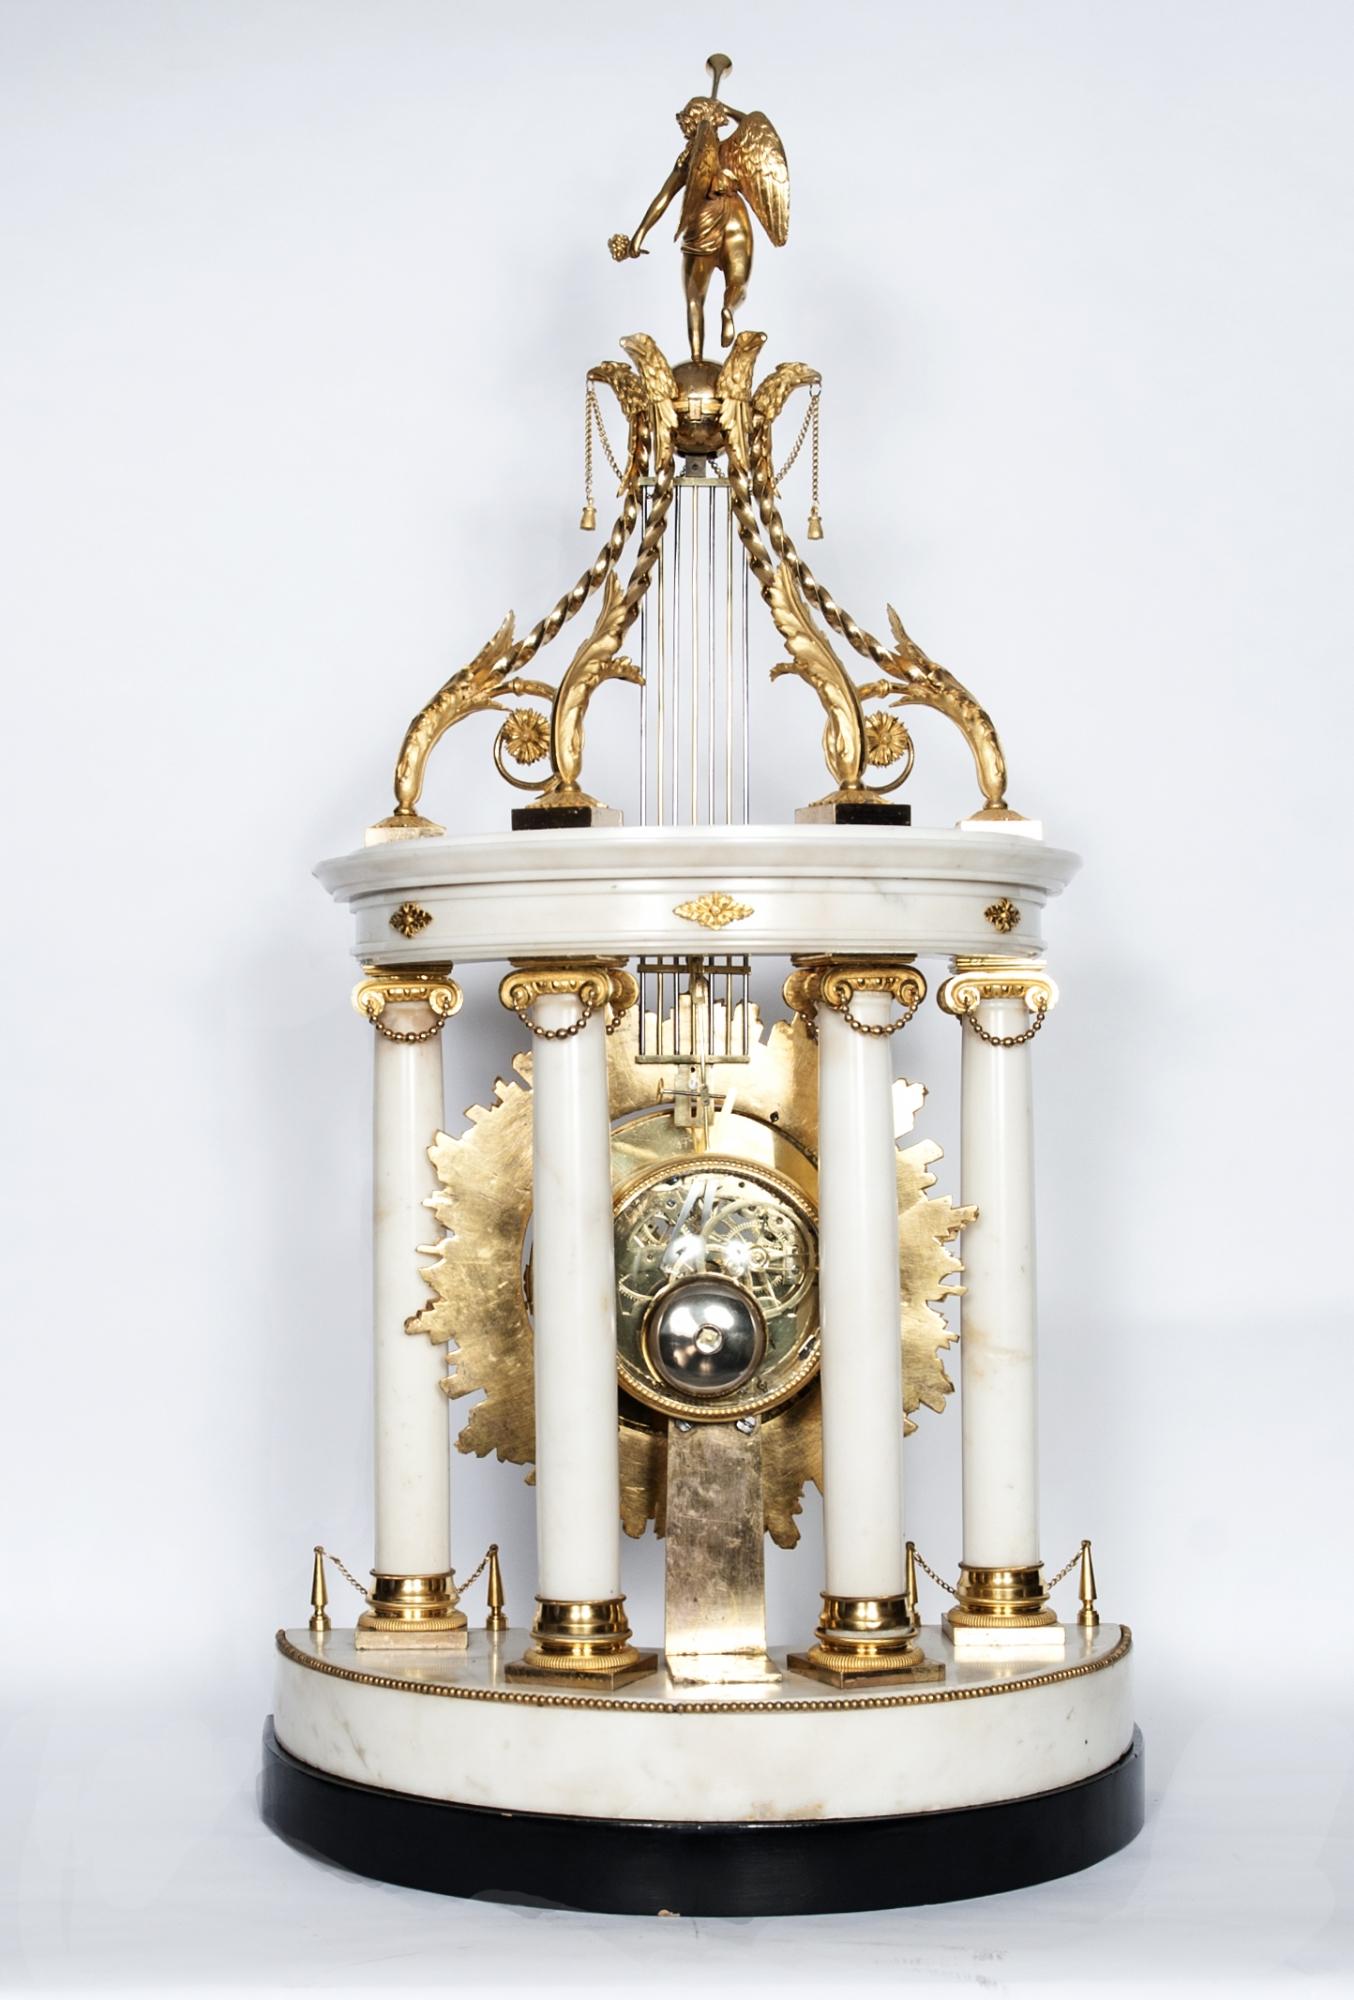 Imposing monumental Louis XVI temple mantel clock with osculating sunburst pendulum surrounded with Strass Chrystal topped with a female angel with trumpet. The beautiful skeletonized movement with date and central sweep seconds. Signed on a dial